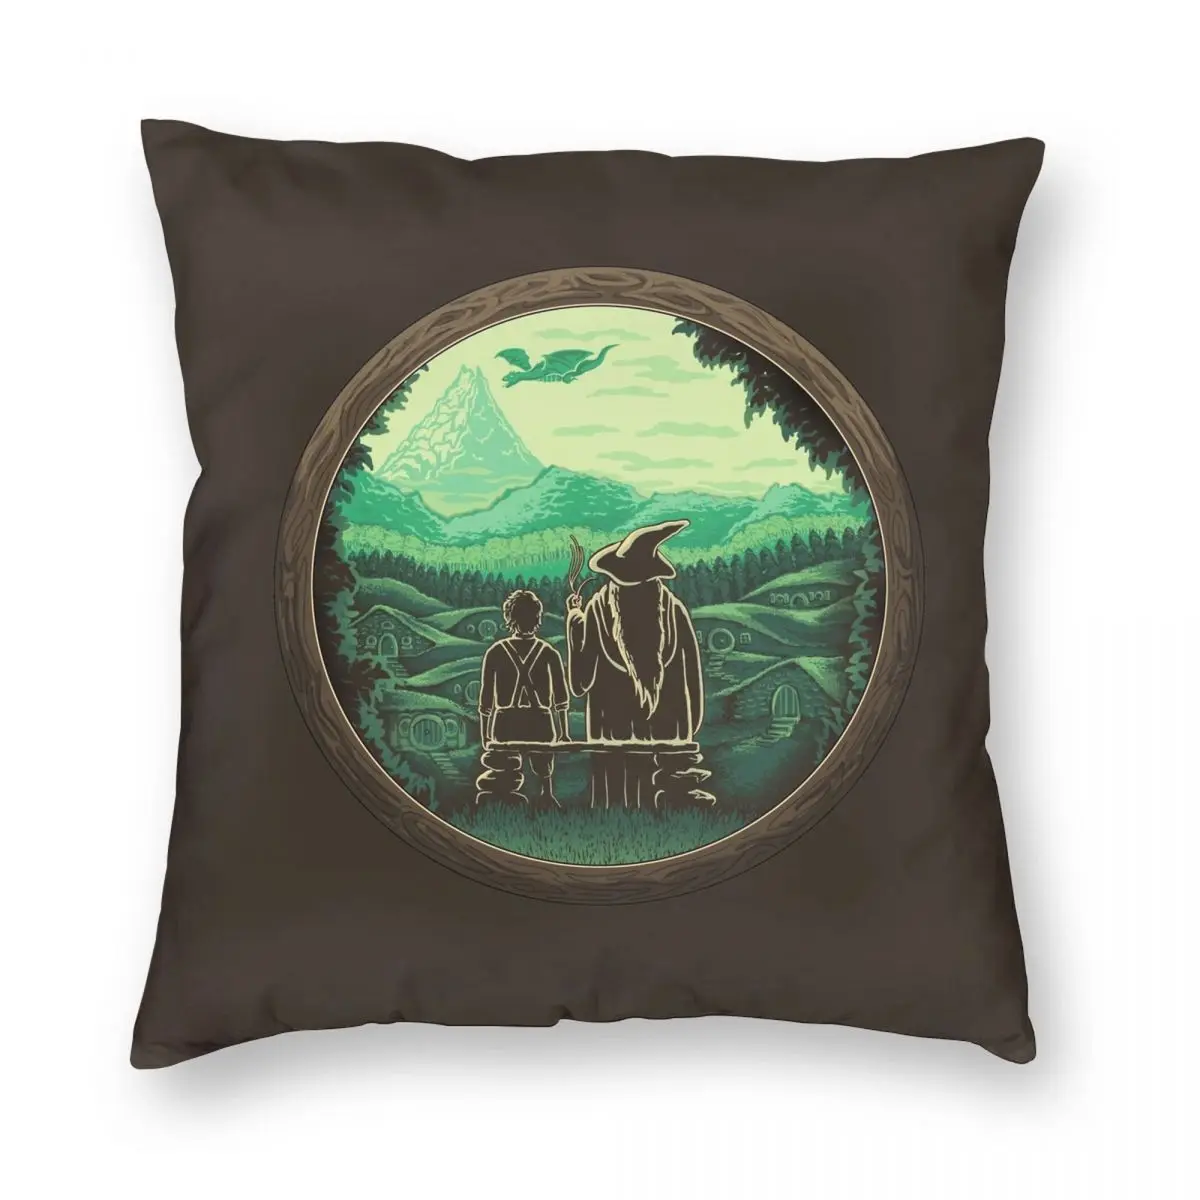 

Let's Have An Adventure Square Pillowcase Polyester Linen Velvet Printed Zip Decor Throw Pillow Case Room Cushion Cover